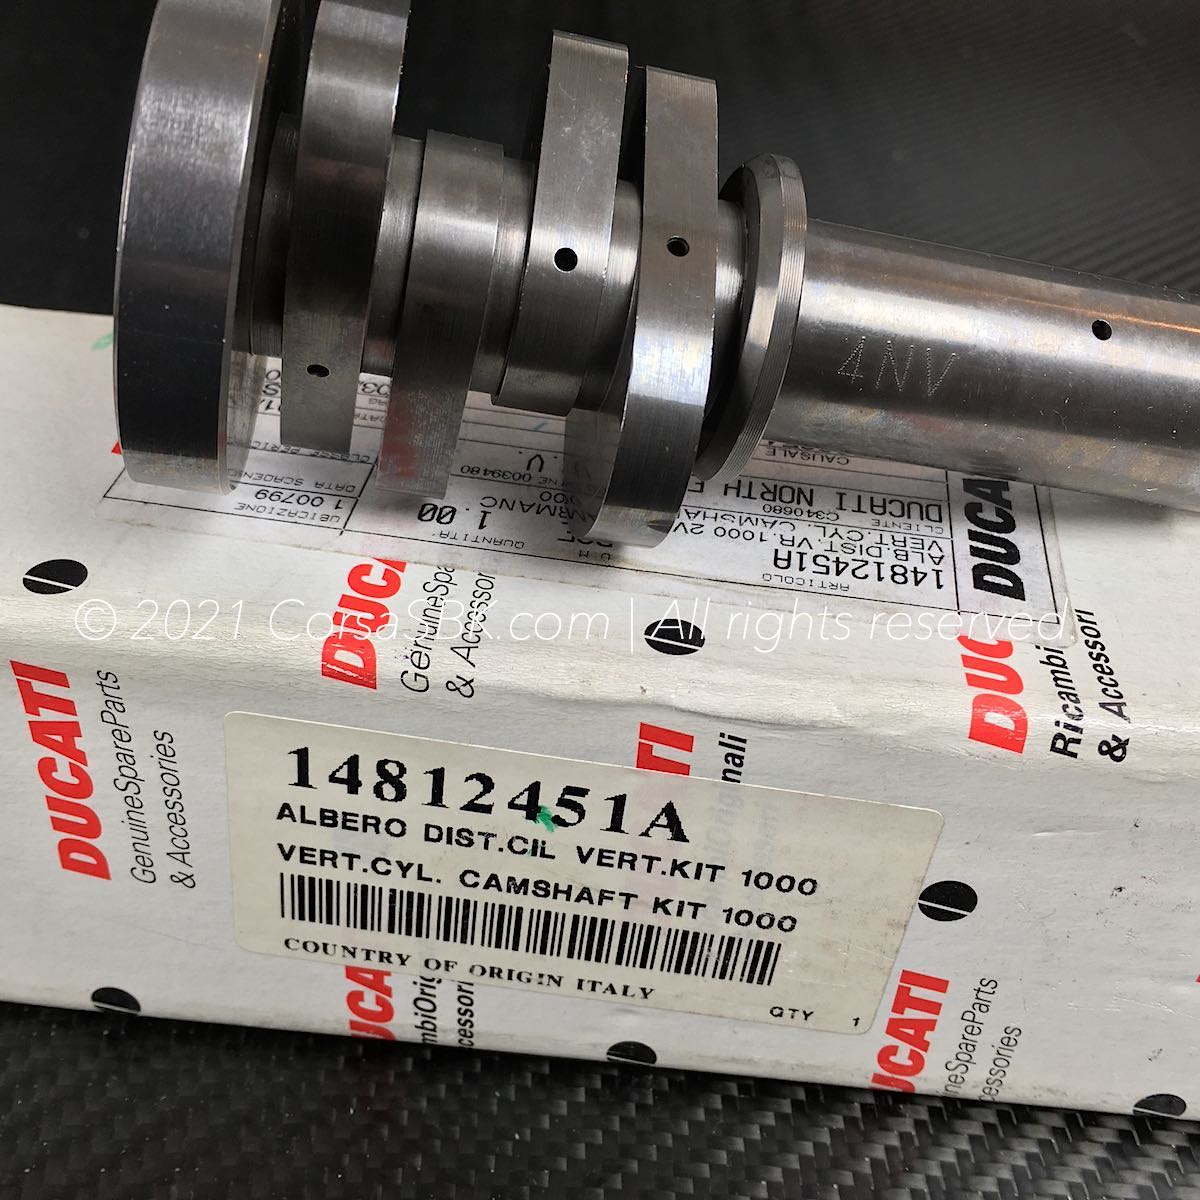 Ducati Performance 2V vertical cyl. cam / camshaft M1000, MTS 1000 / 1000 S  ≤ MY06, SS 1000 14812451A